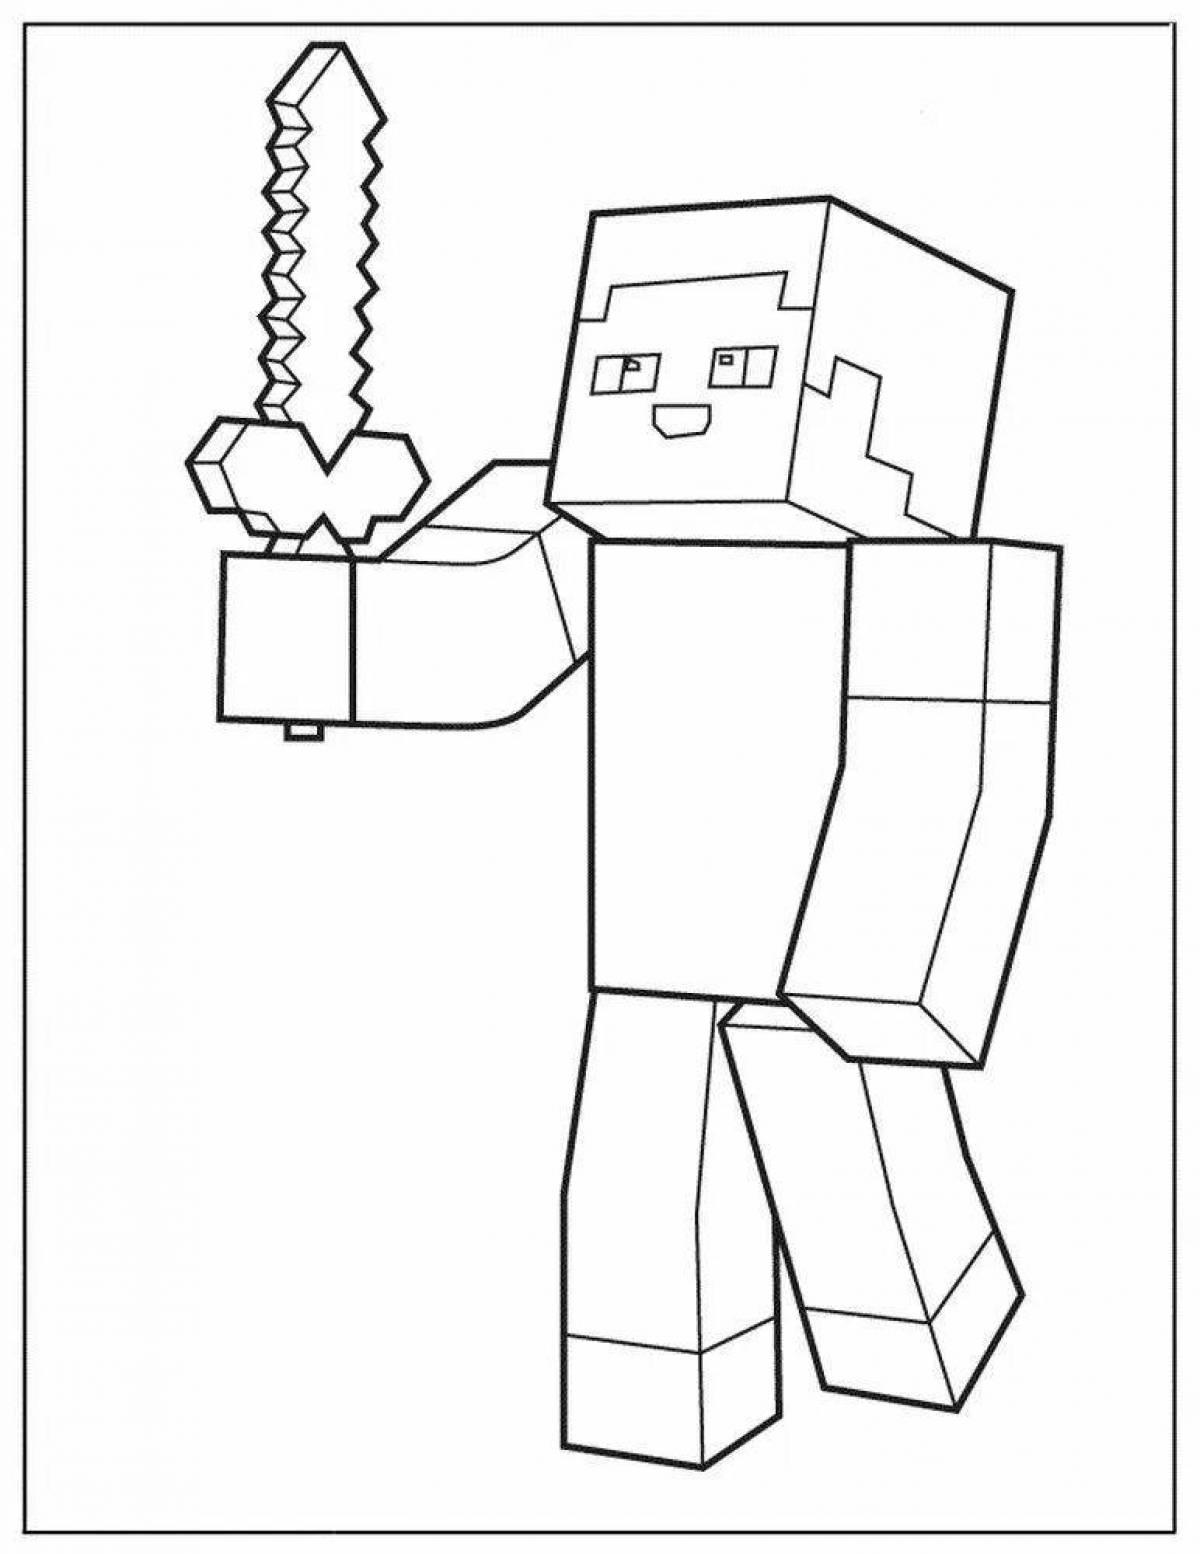 Coloring playful minecraft heroes